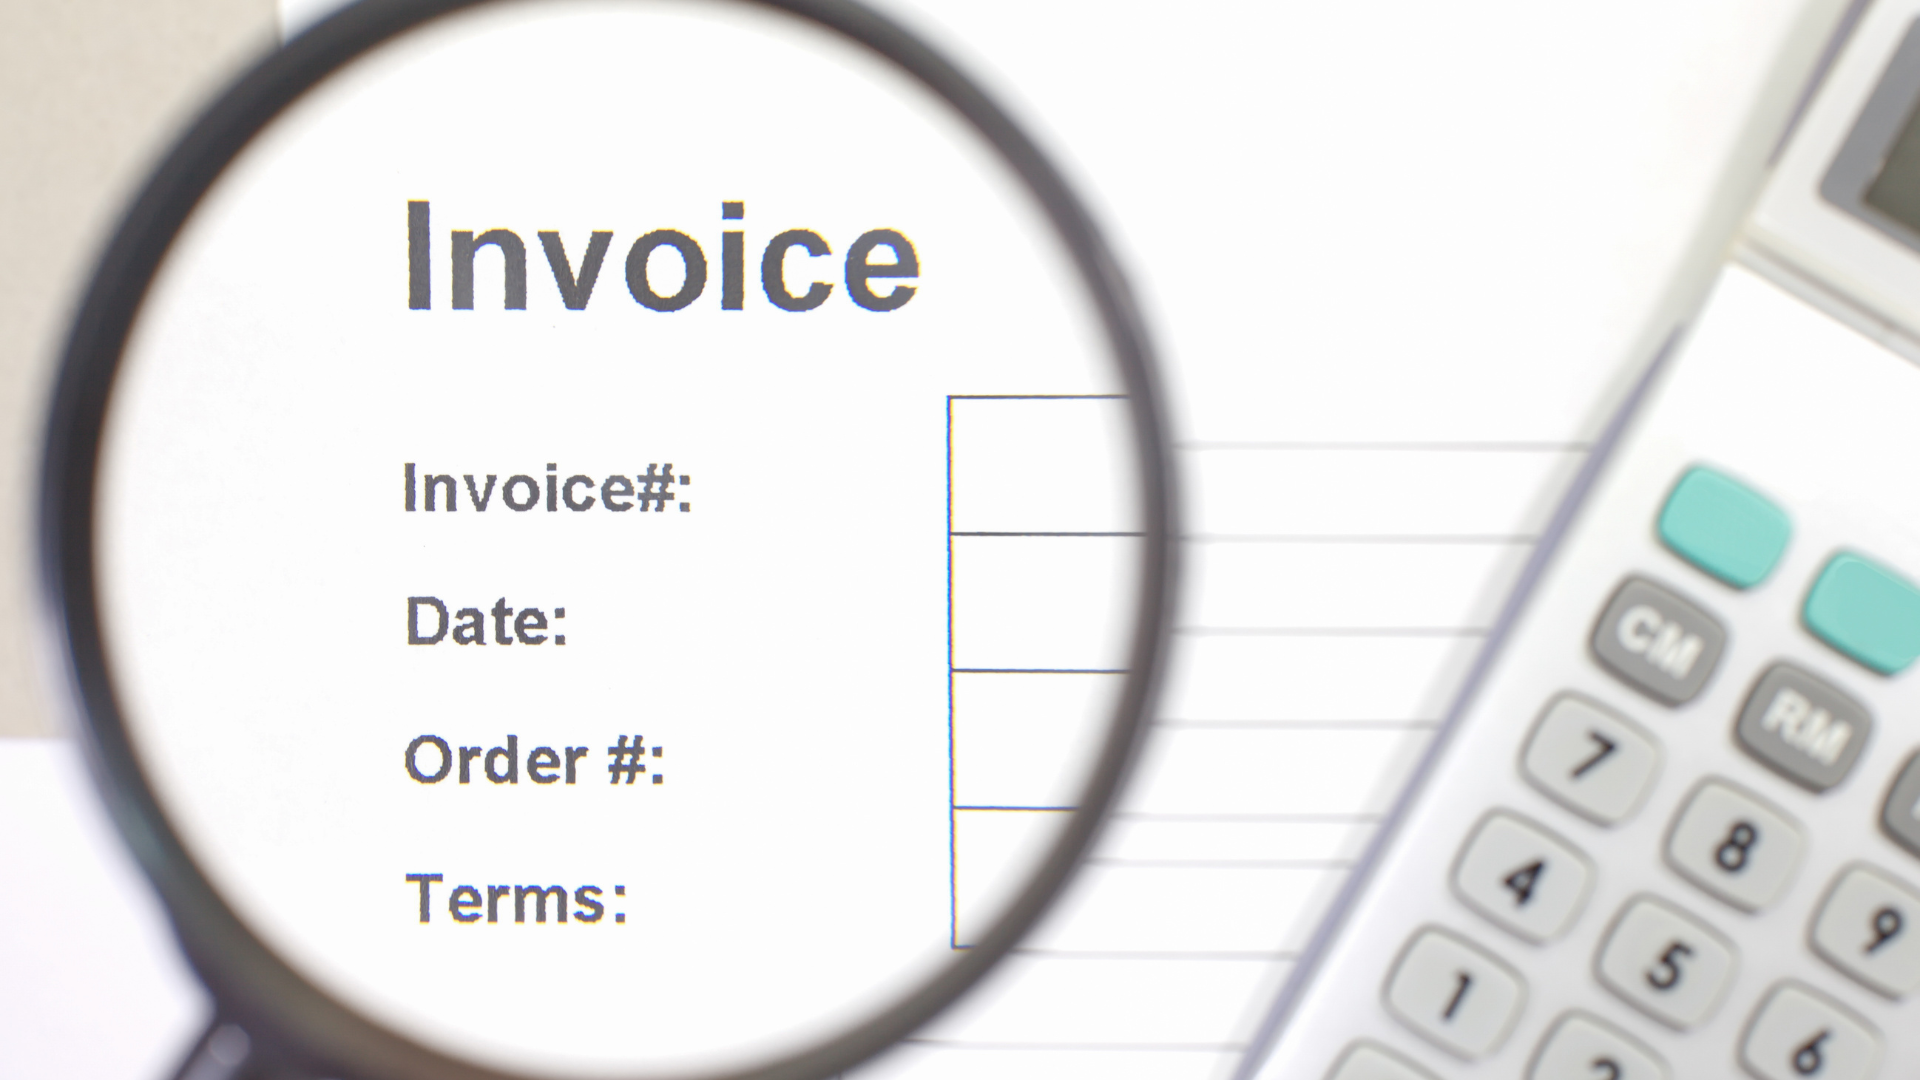 Invoices and quotes serve distinct purposes in business transactions. An invoice is issued after goods or services have been delivered, requesting payment formally and creating a legal record of the transaction. On the other hand, a quote is provided before work commences, offering pricing information and estimates to potential customers. Understanding these differences is crucial for effective financial management and transparent client communication."